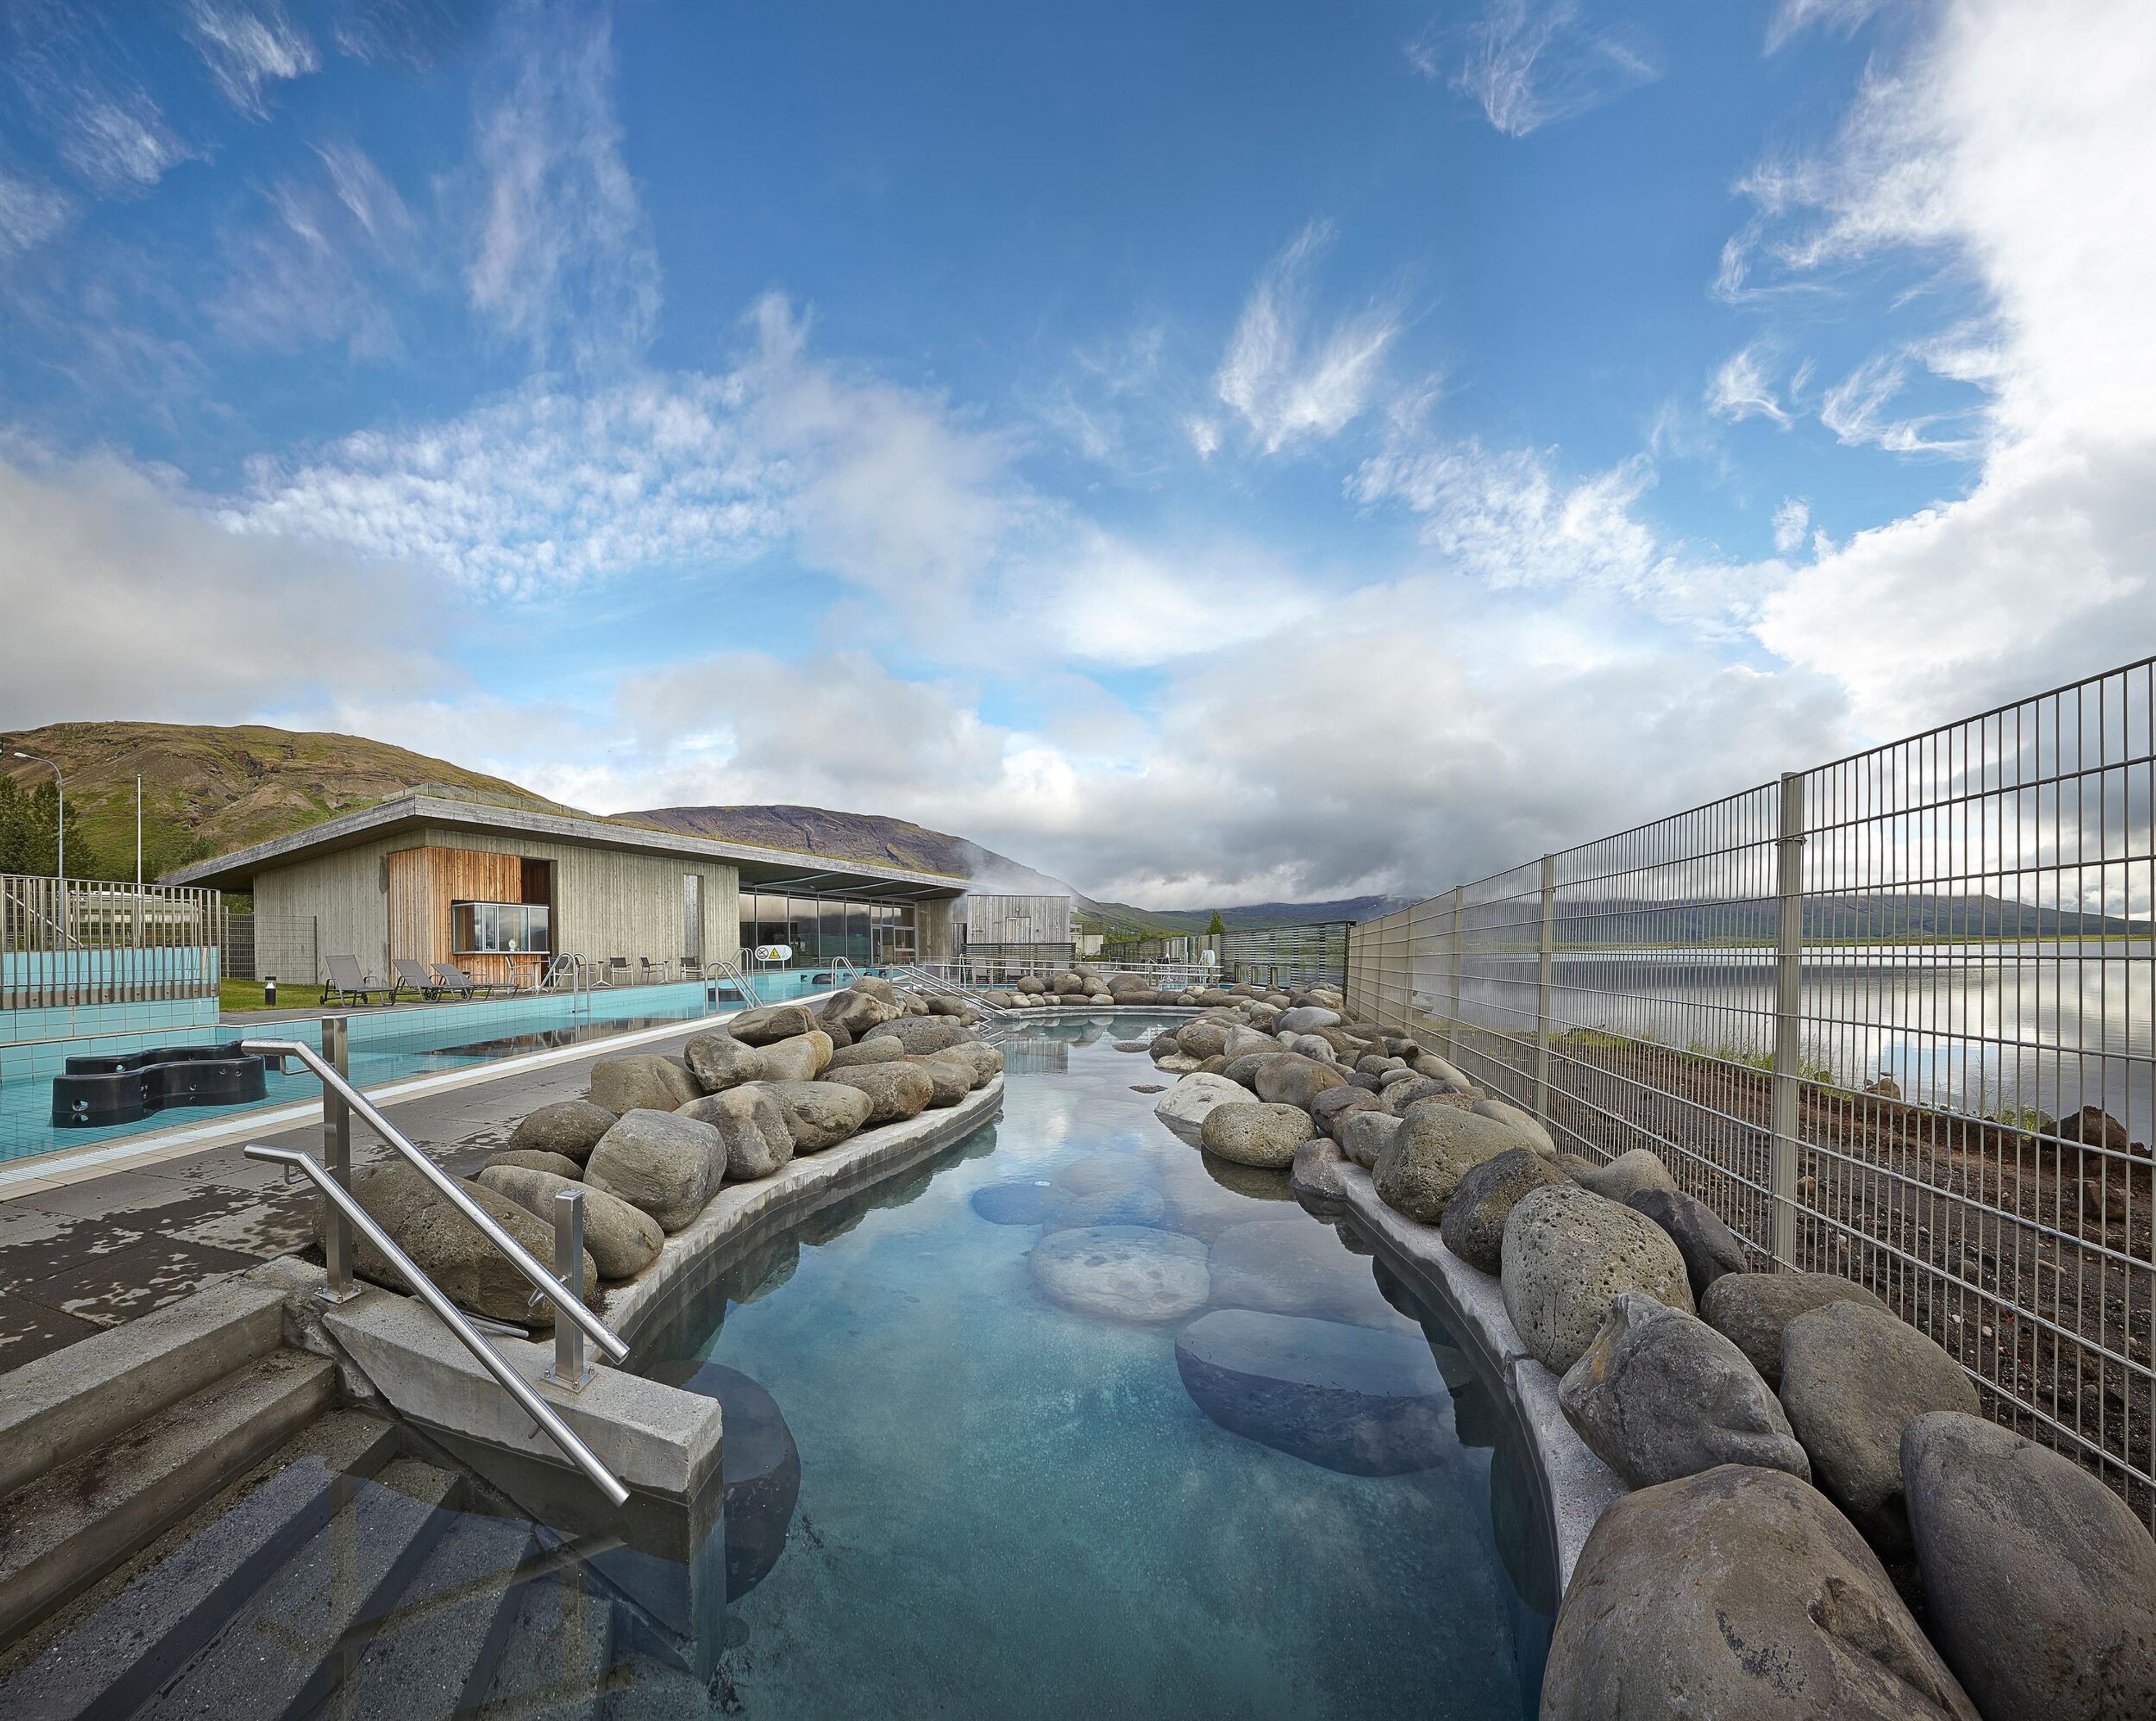 An outdoor geothermal pool with steaming blue water, nestled among rocks under a dramatic sky, featuring a wooden building in the background, symbolizing relaxation and natural beauty.